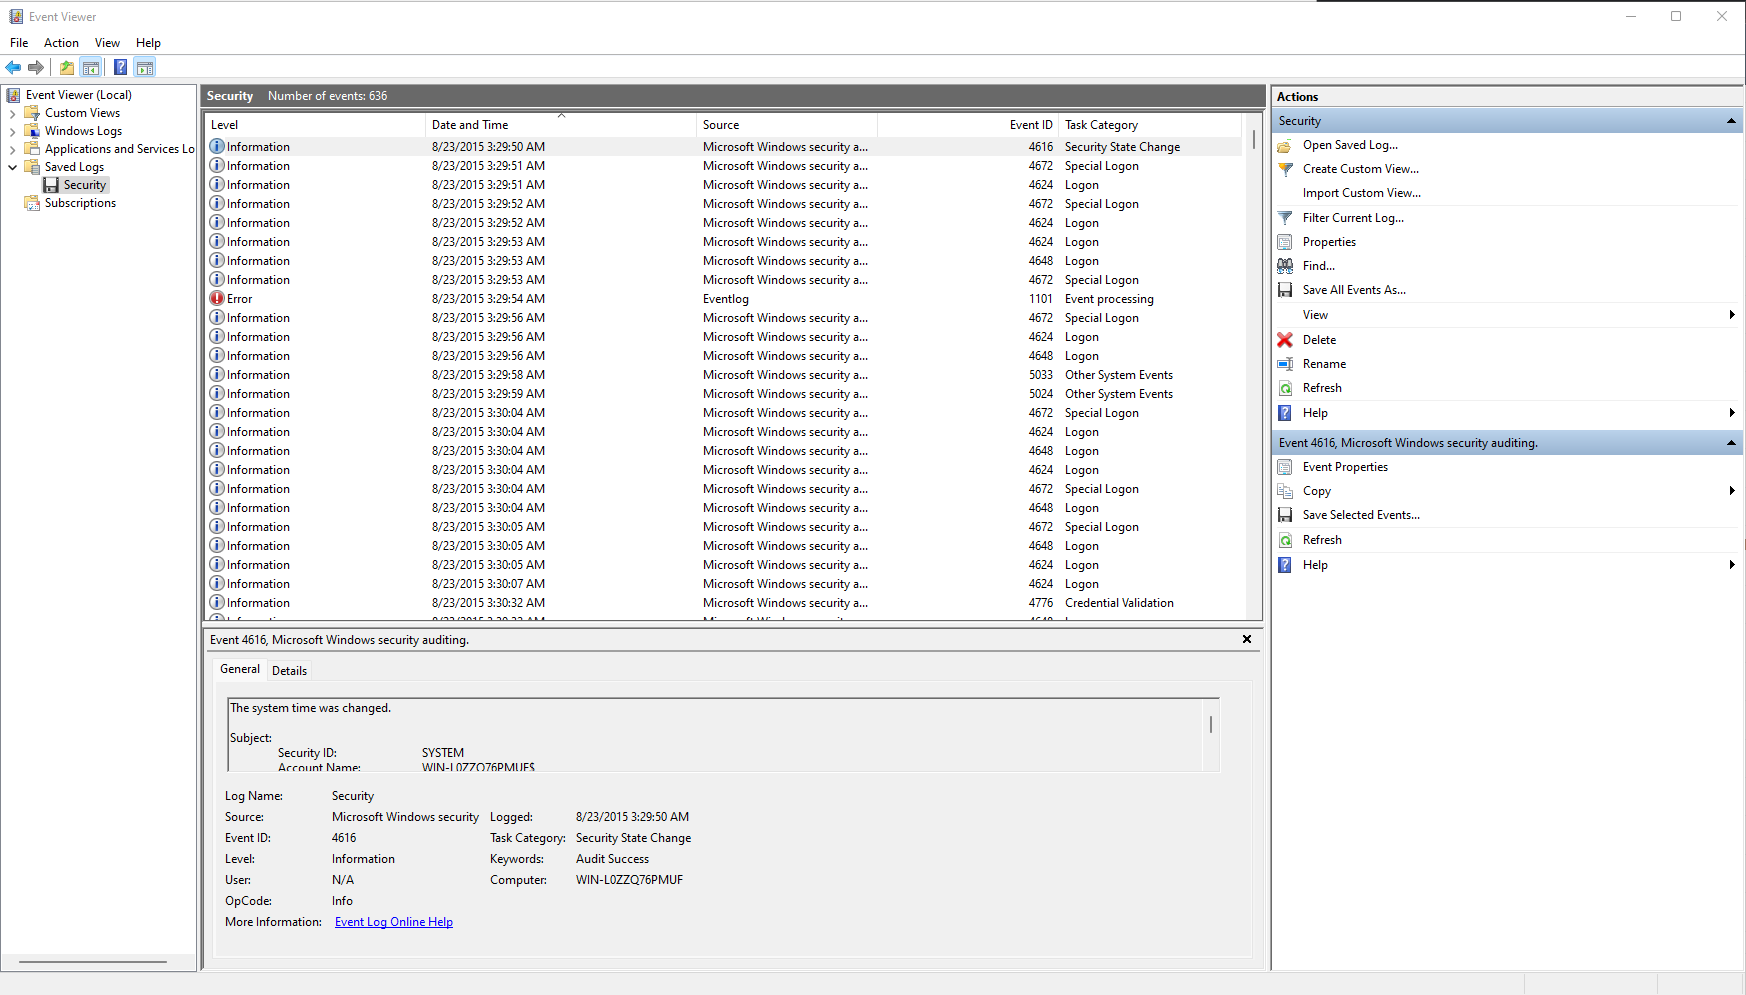 Image of the Security Event Log loaded in Event Viewer